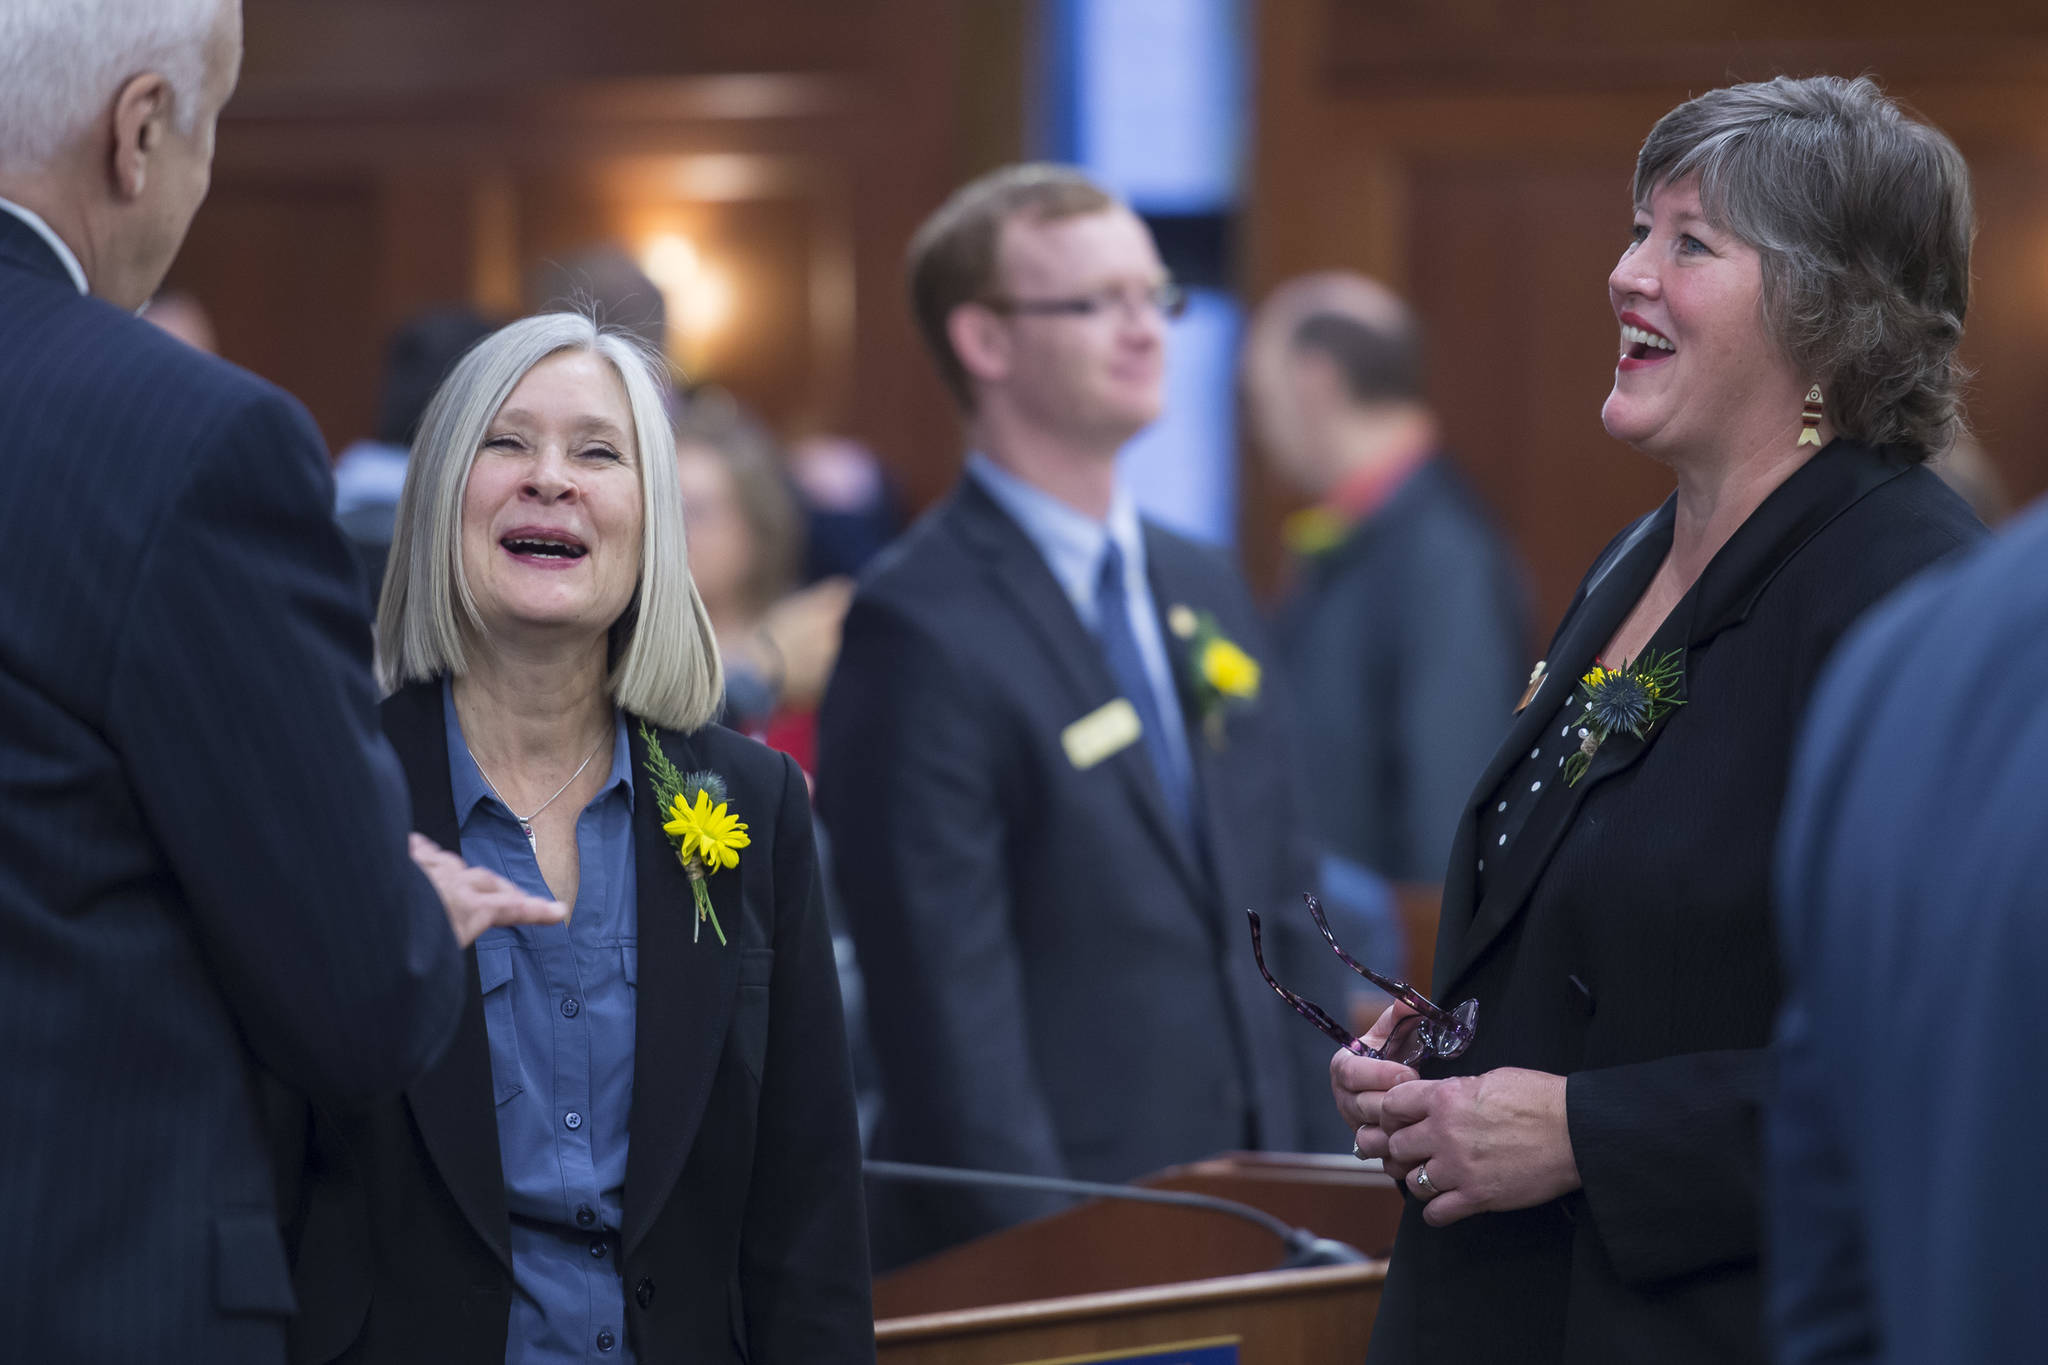 Rep. Andi Story, D-Juneau, center, and Rep. Sara Hannan, D-Juneau, share a laugh with Rep. Bart LeBon, R-Fairbanks, on the opening day of the 31st Session of the Alaska Legislature on Tuesday, Jan. 15, 2019. (Michael Penn | Juneau Empire)